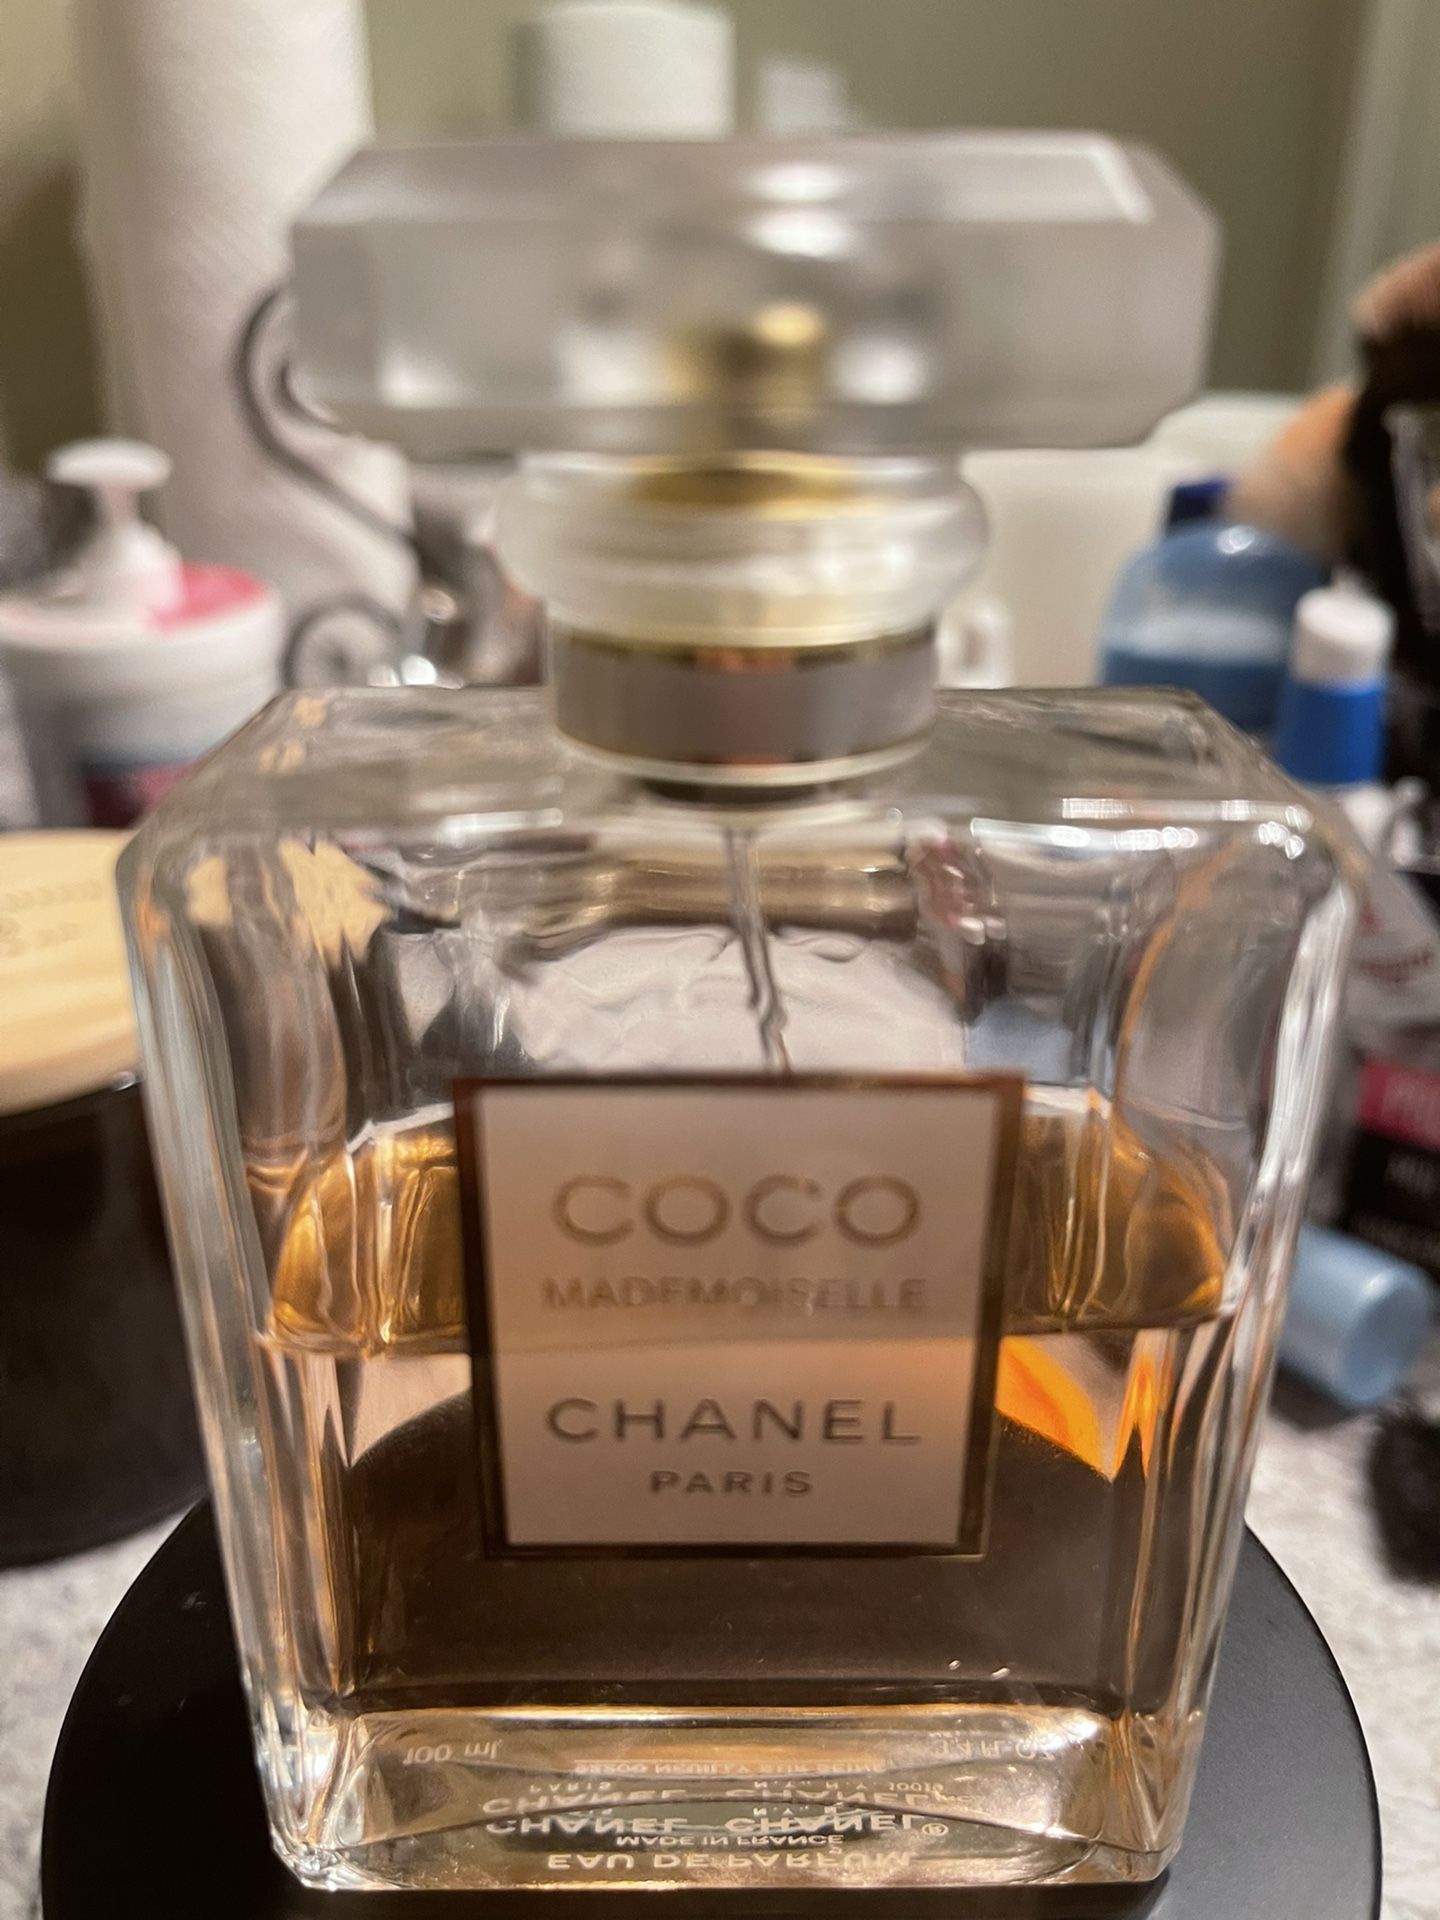 Coco chanel madmoaseille eau parfum for Sale in Miami, FL - OfferUp